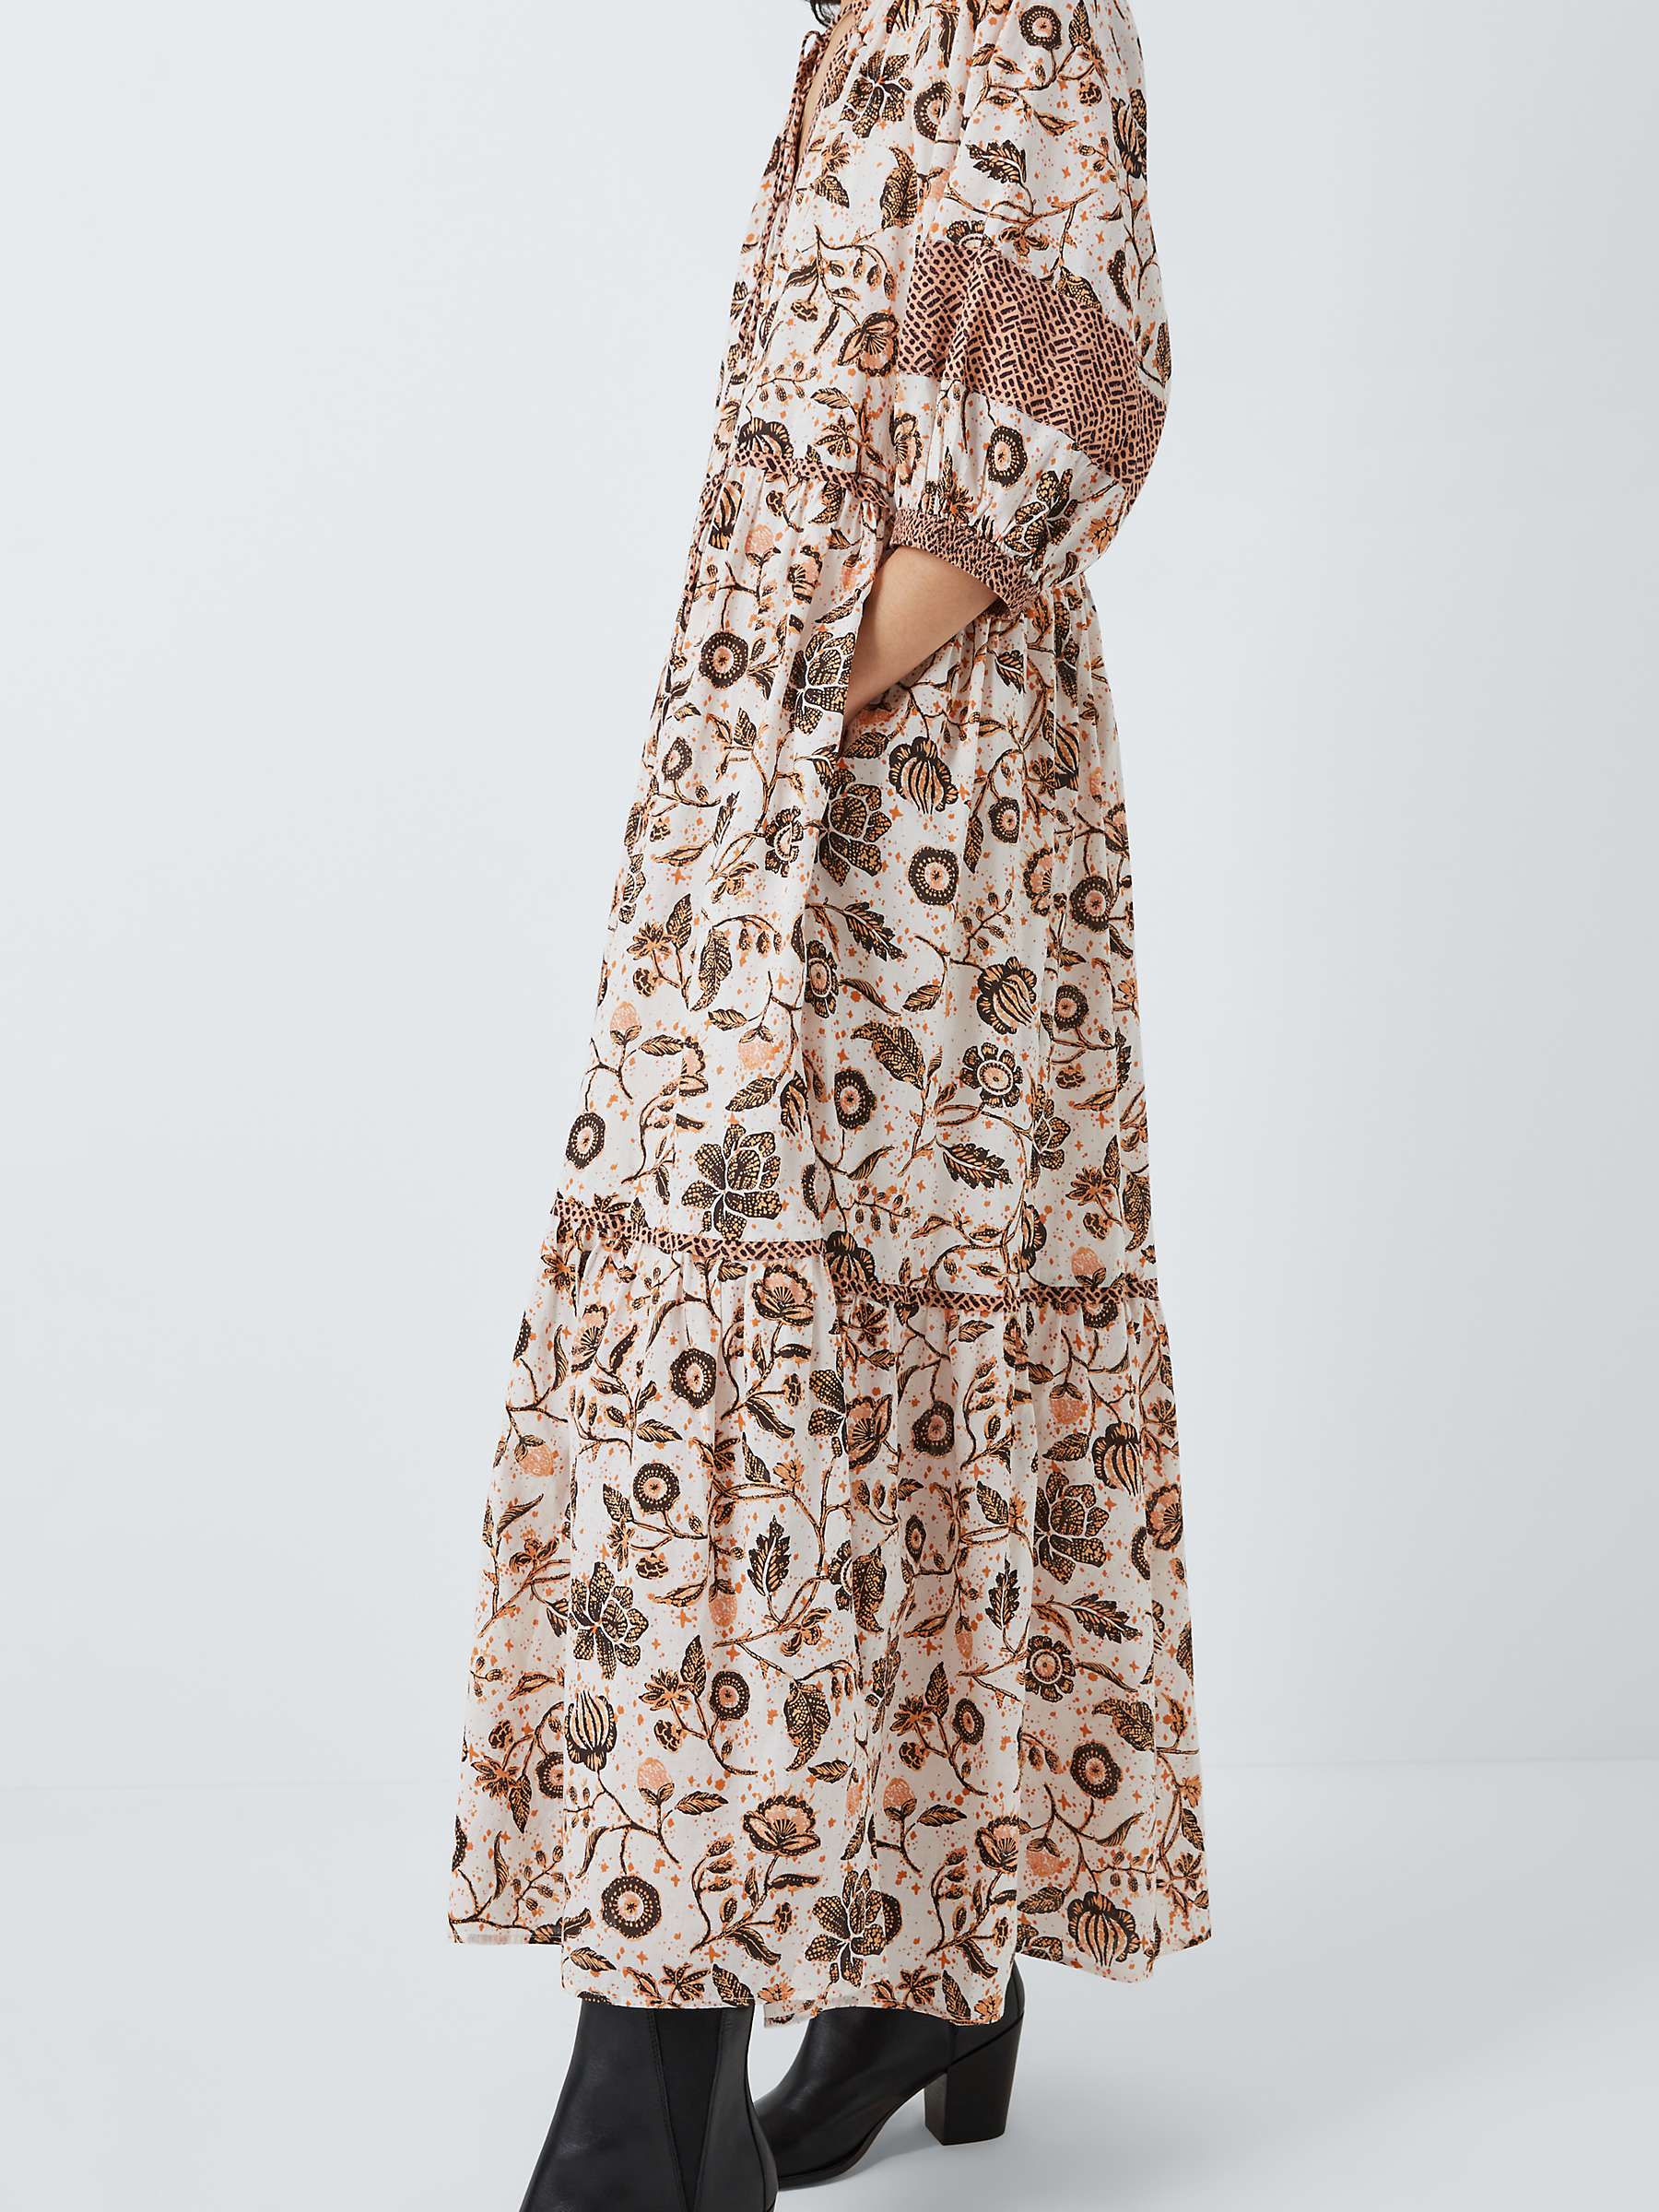 Buy AND/OR Jacklin Island Floral Tiered Dress, Cream Online at johnlewis.com